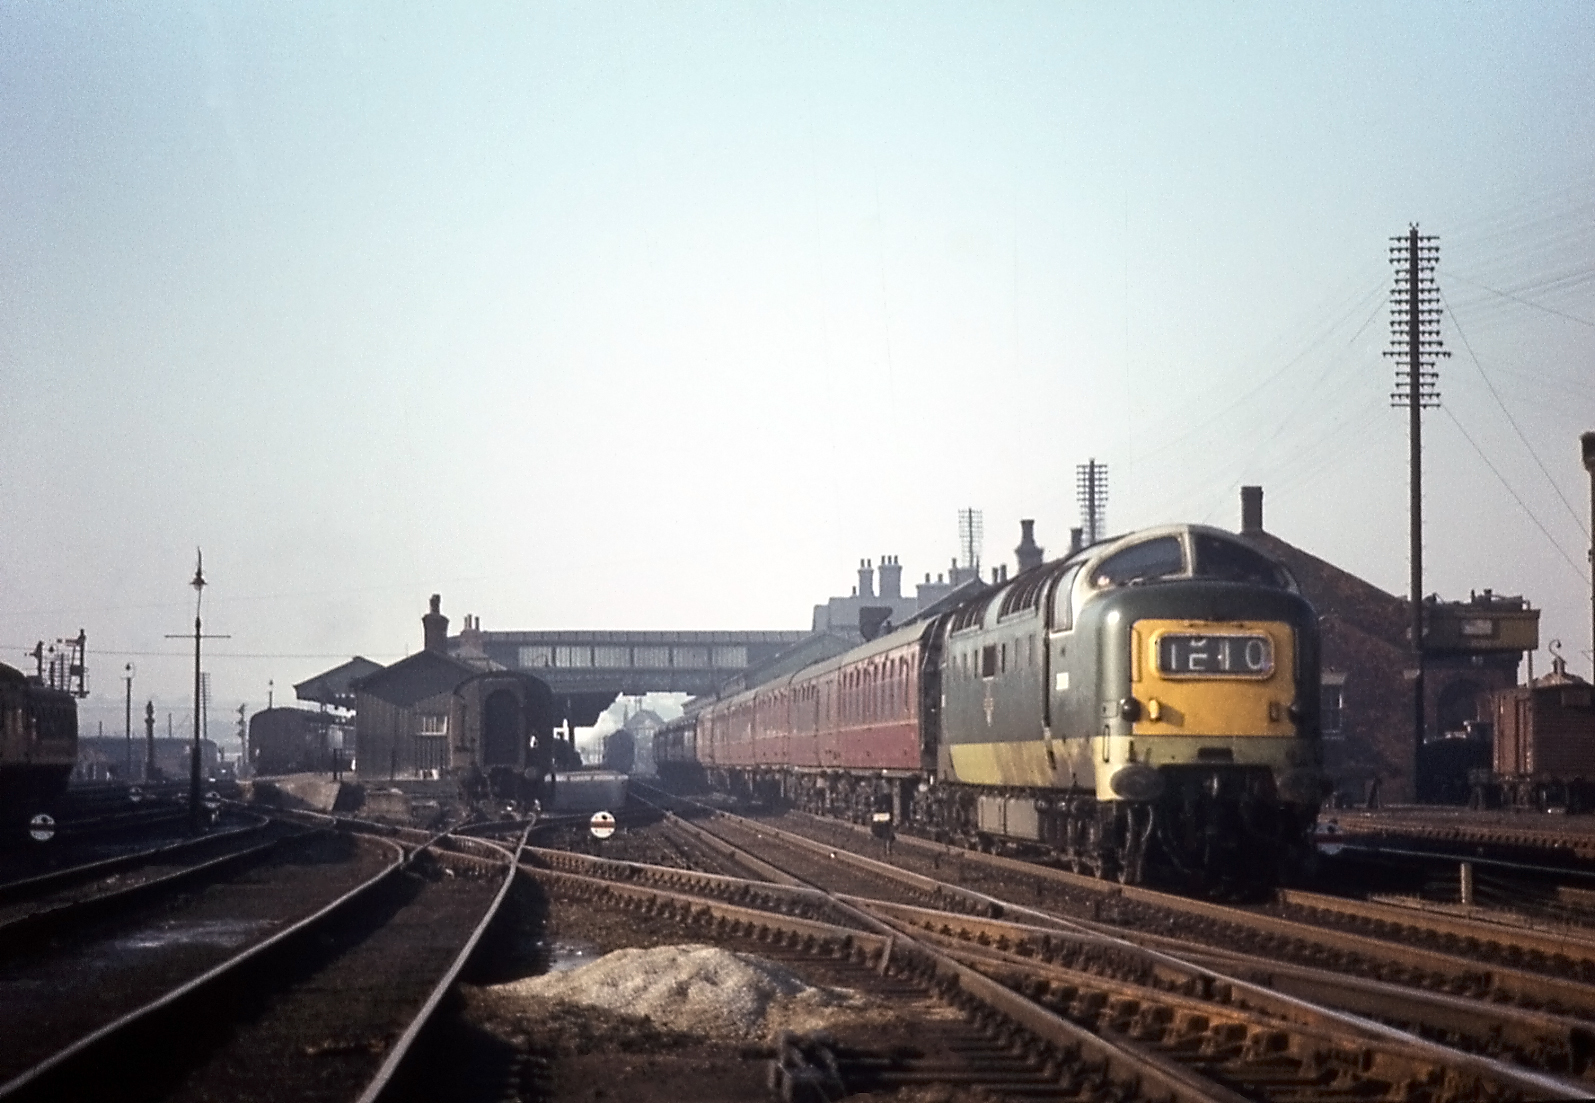  This is the approach to the station from the south in the early 1960s. It was taken from between the Main lines, on the right, and the Down Slow line on the left. Beyond the Down Slow line is Carriage Siding No.1. The roof of Grantham Yard box can be glimpsed above the front of the first coach of the approaching train. All the connections with the line which crosses diagonally from the bottom right corner to the Western platform on the left were under the control of Grantham Yard box. The disc signals facing the camera control shunting movements towards the station platforms. On the right the lofty pole route carries telegraph and telephone communication along the eastern side of the railway. Photograph by Noel Ingram, used with permission from Steam World.